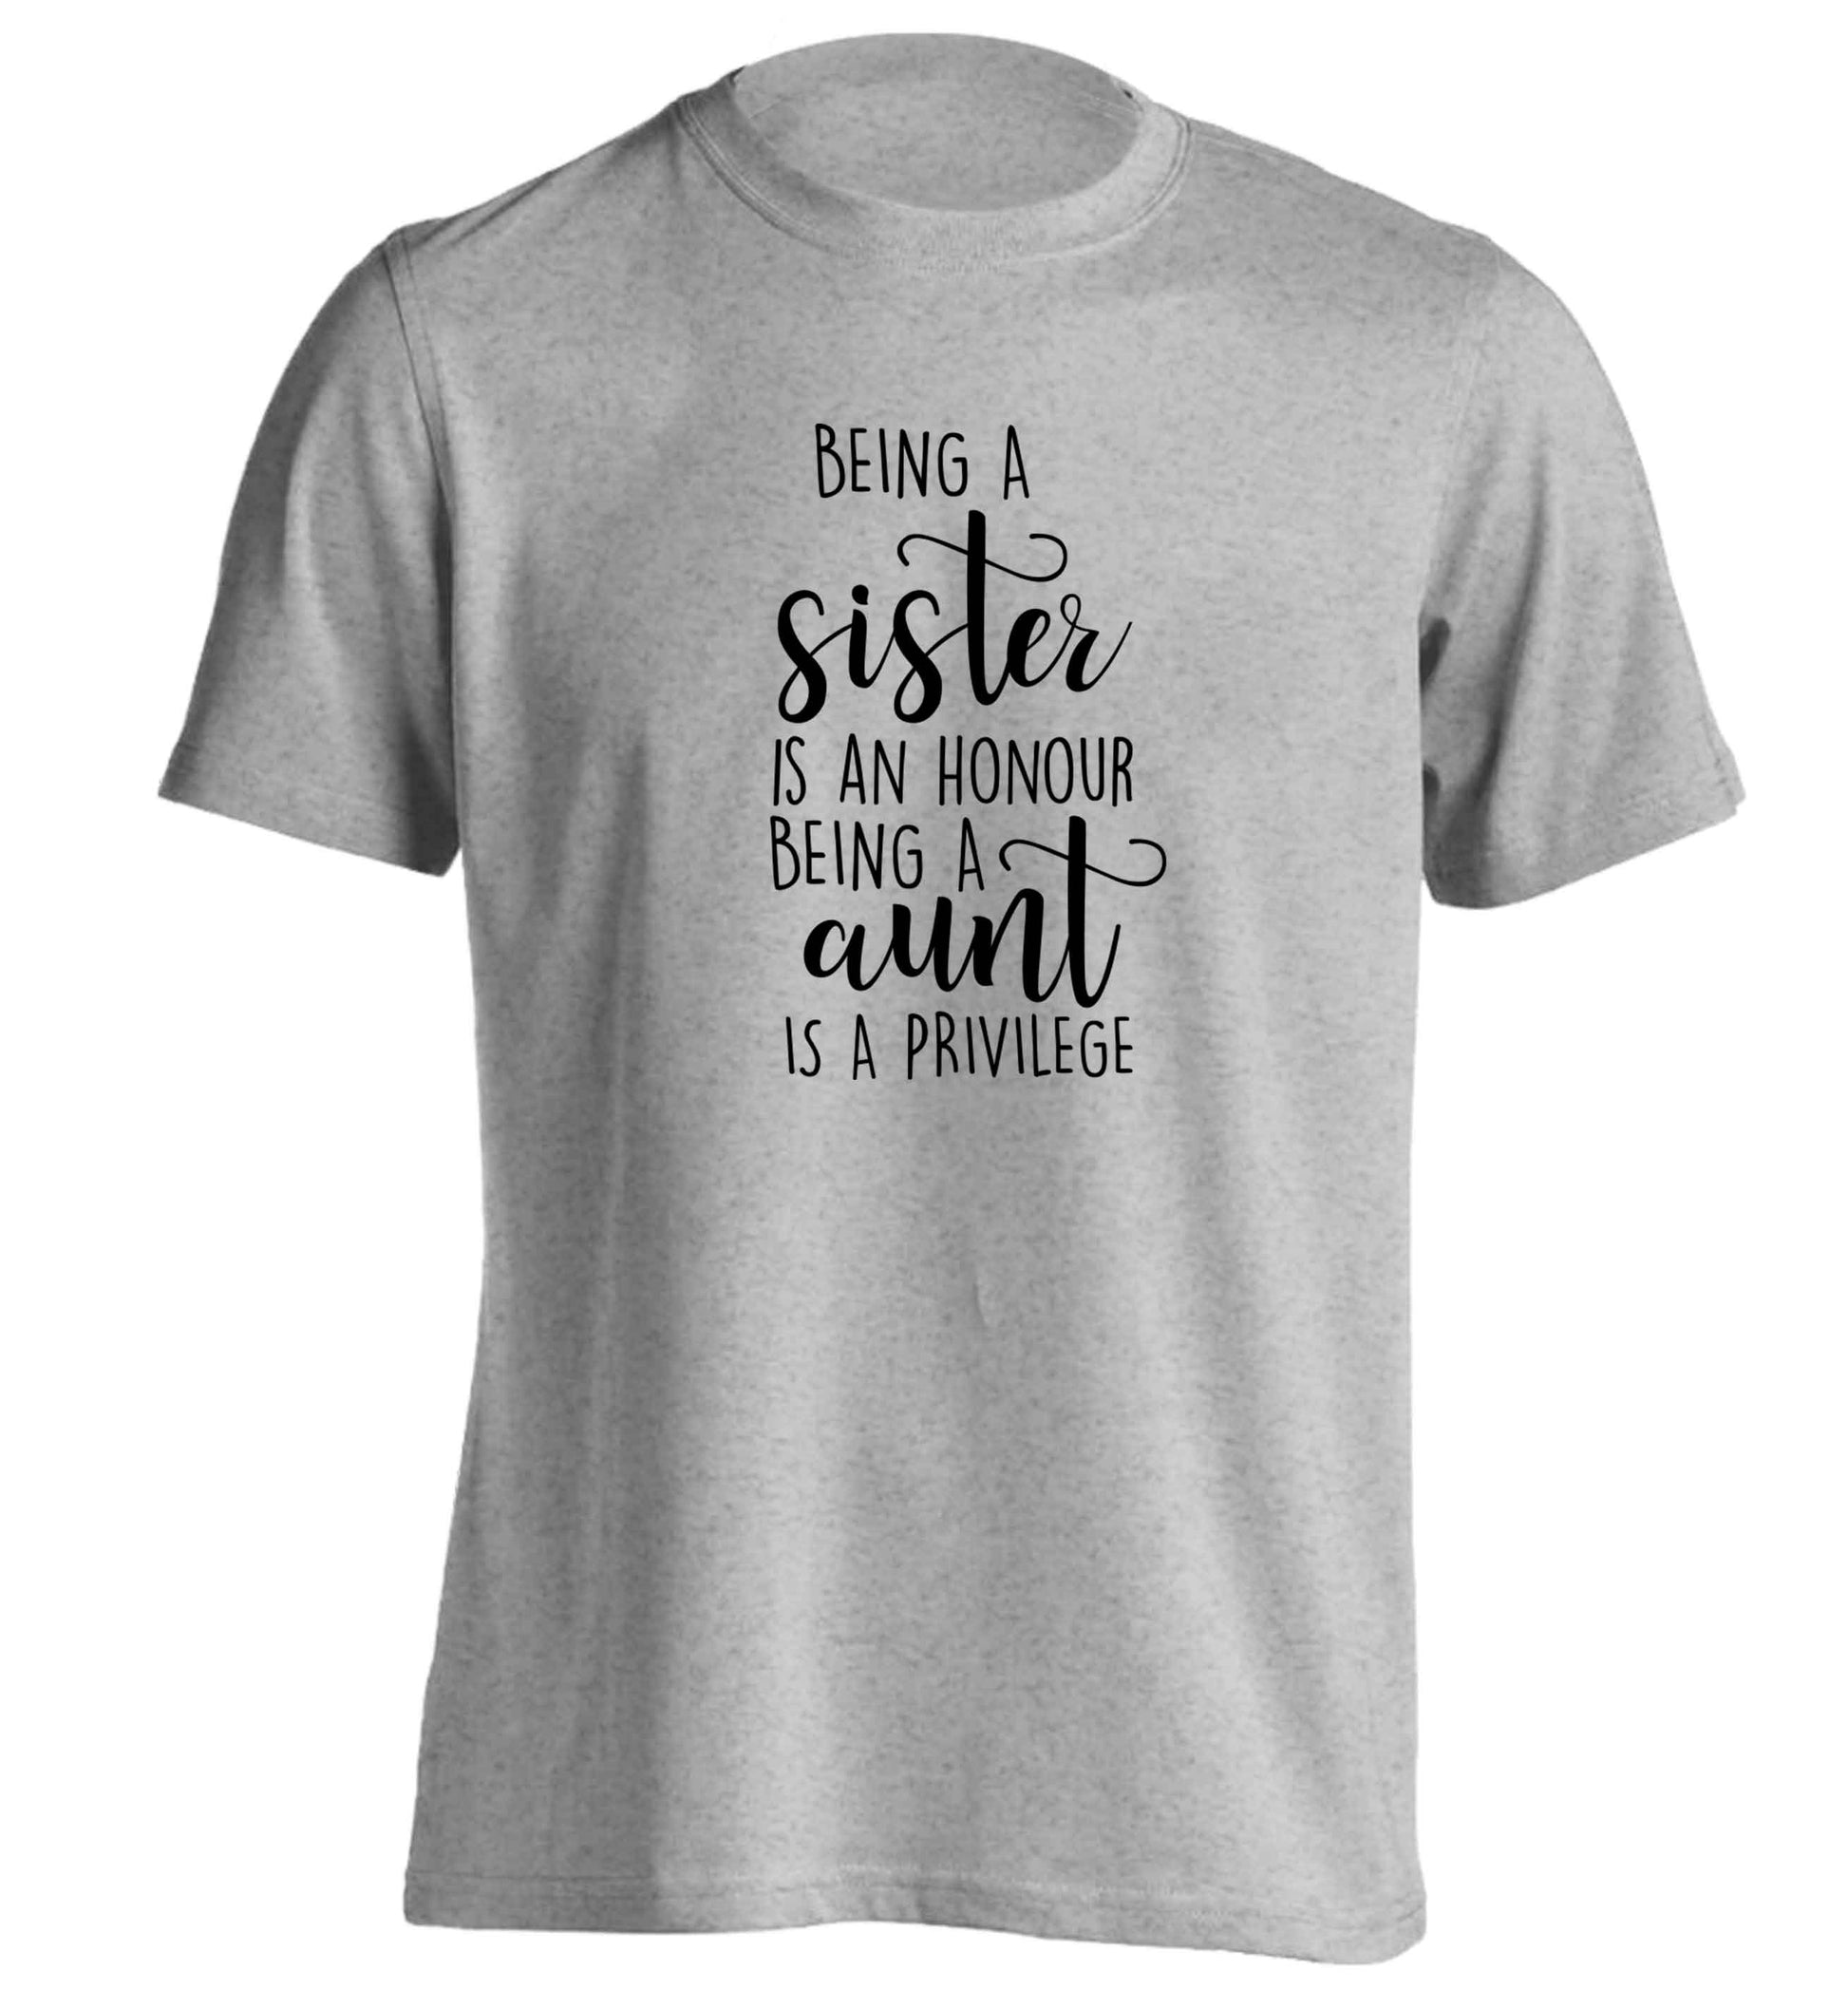 Being a sister is an honour being an auntie is a privilege adults unisex grey Tshirt 2XL